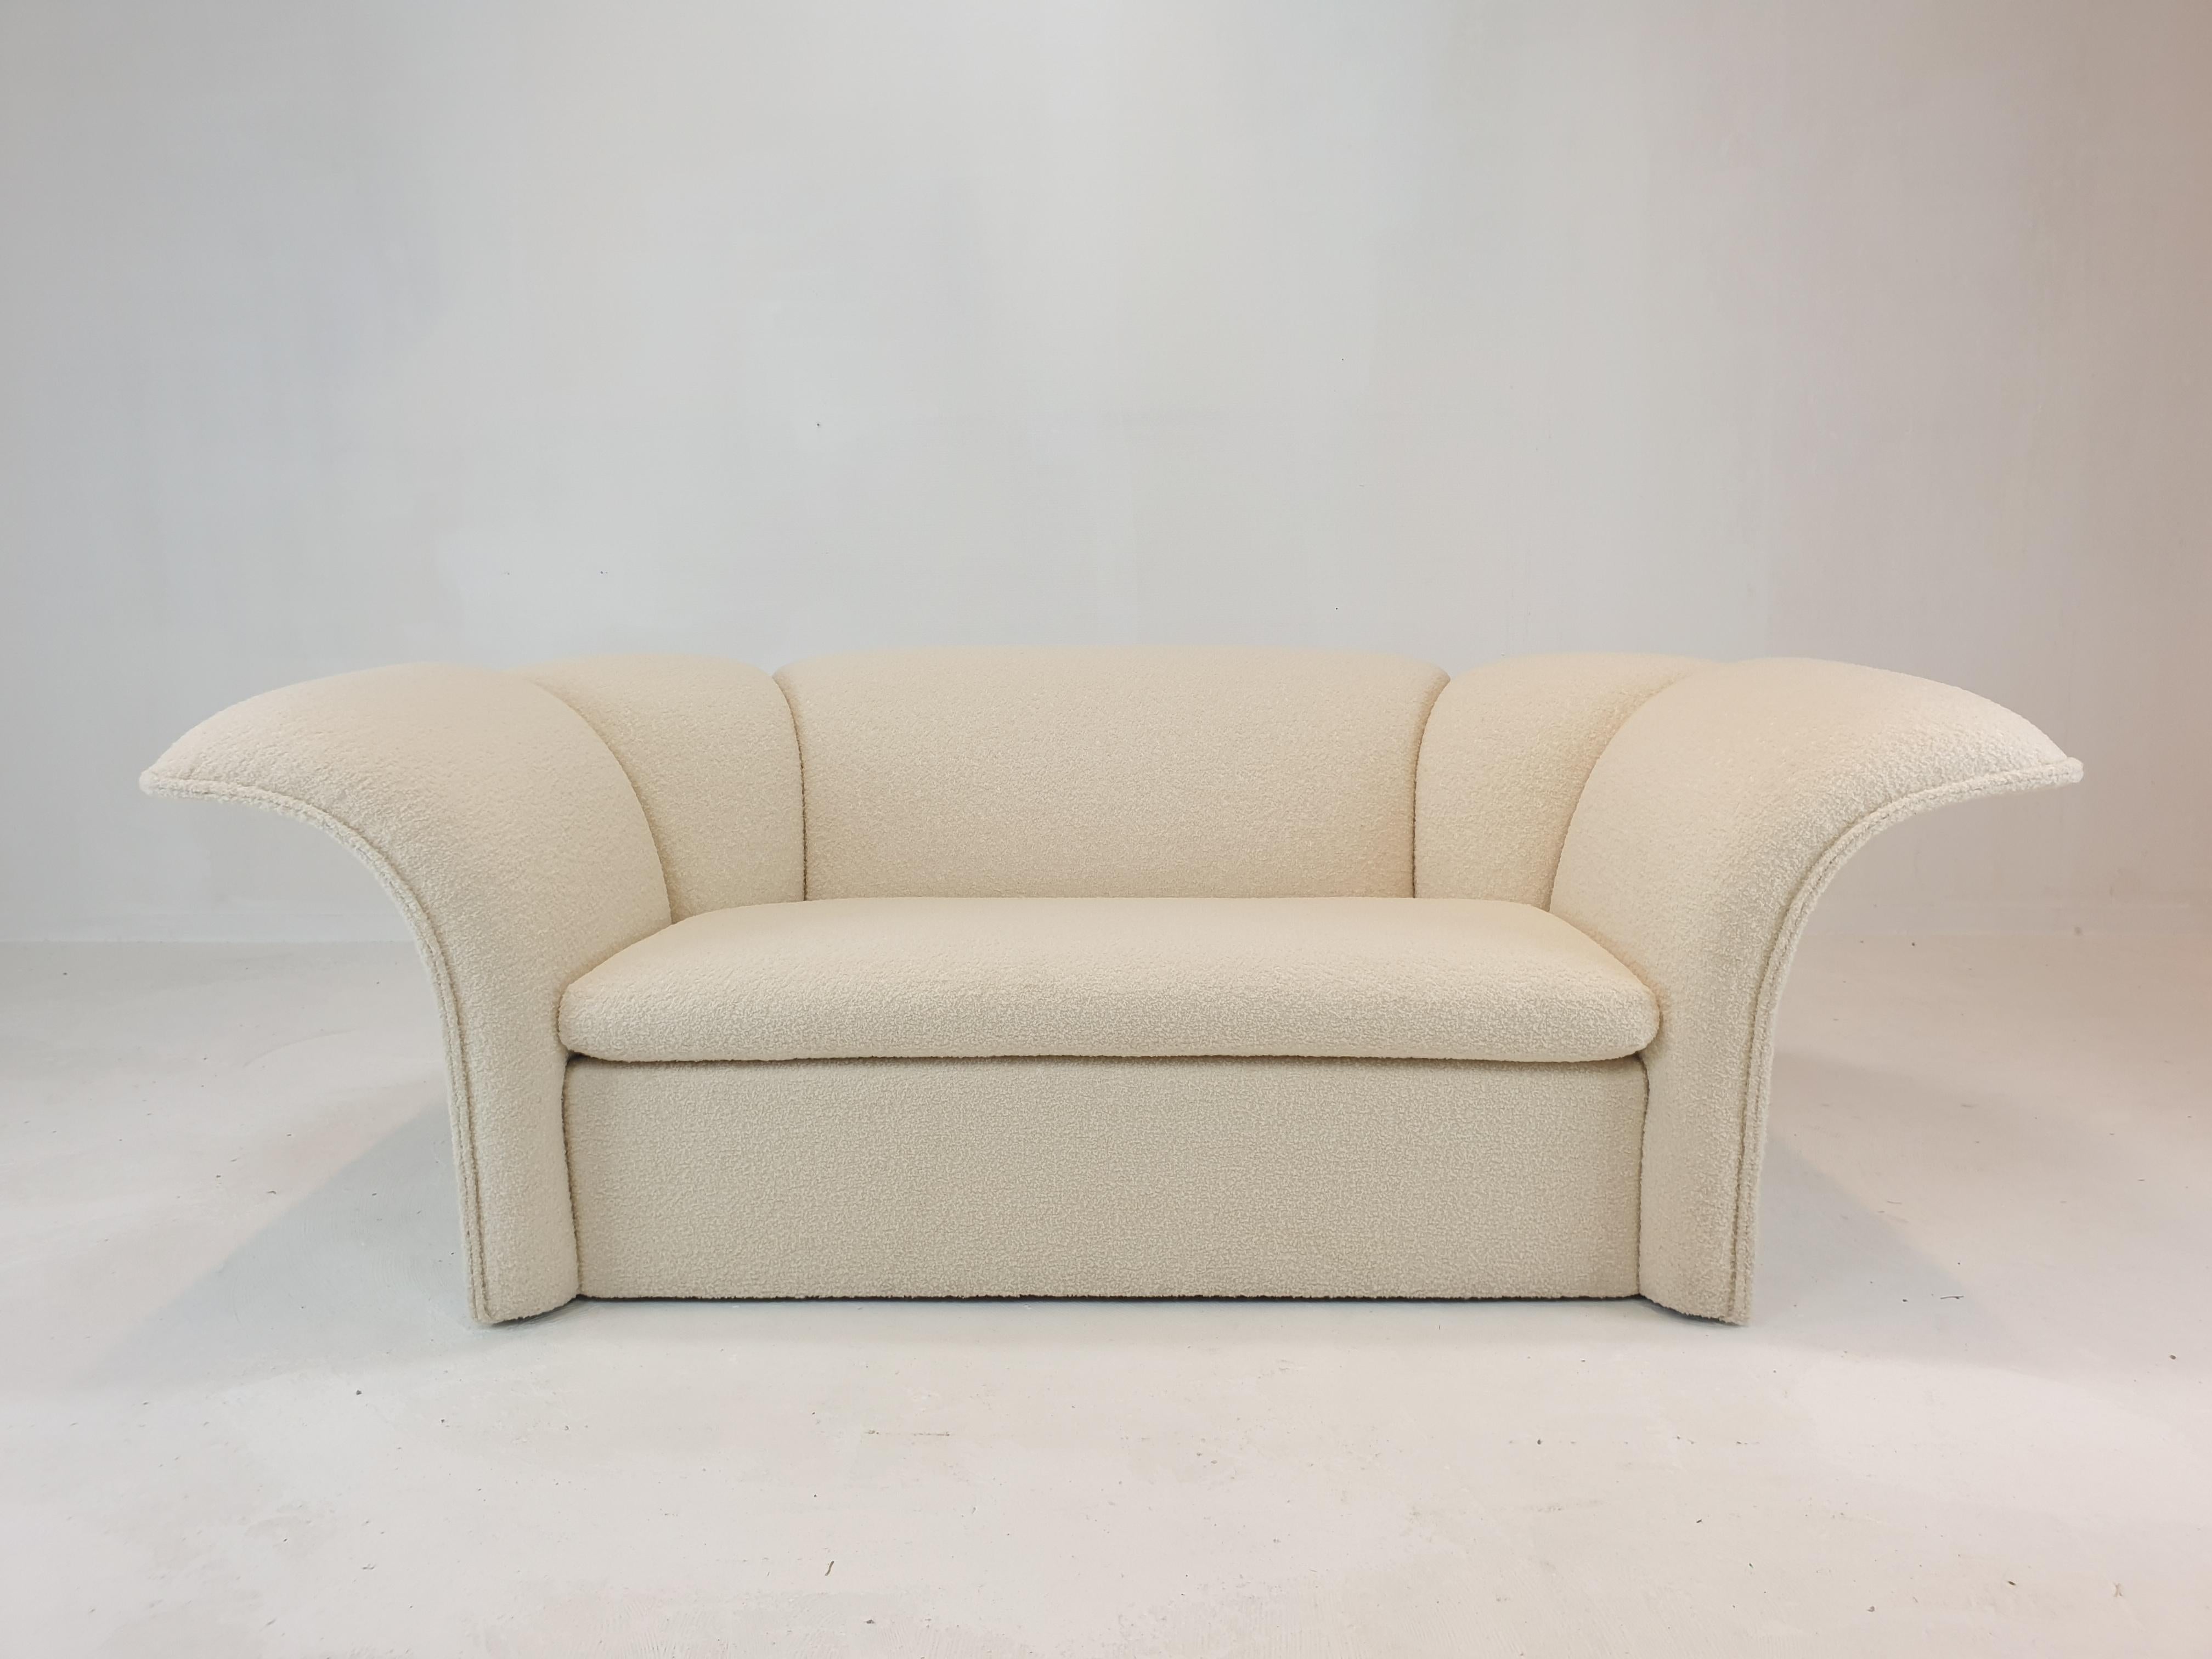 Dutch 2-Seat Sofa by Artifort, 1970's For Sale